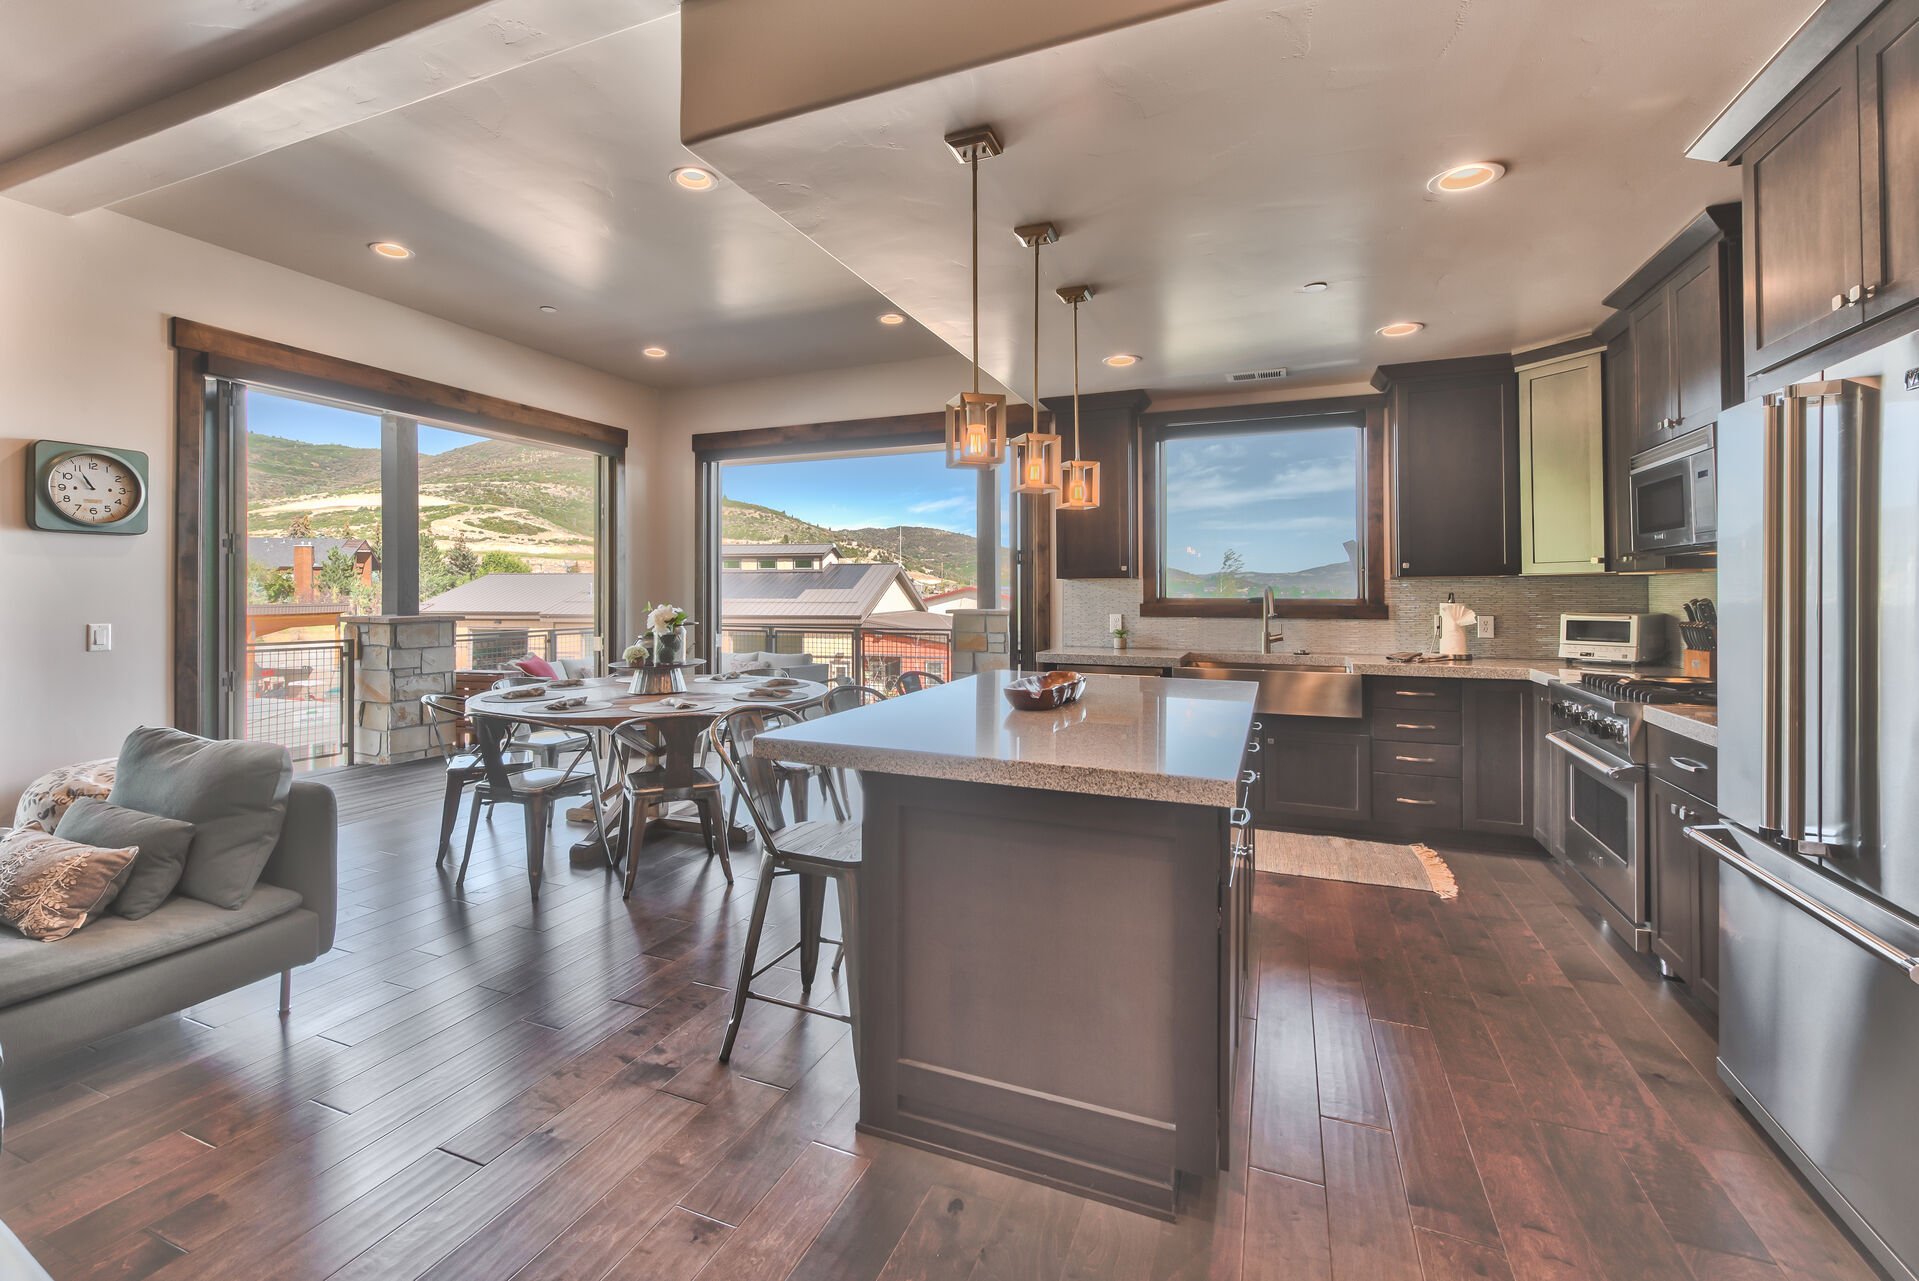 Gourmet Kitchen, Dining Area With Ski Resort and Golf Course Views